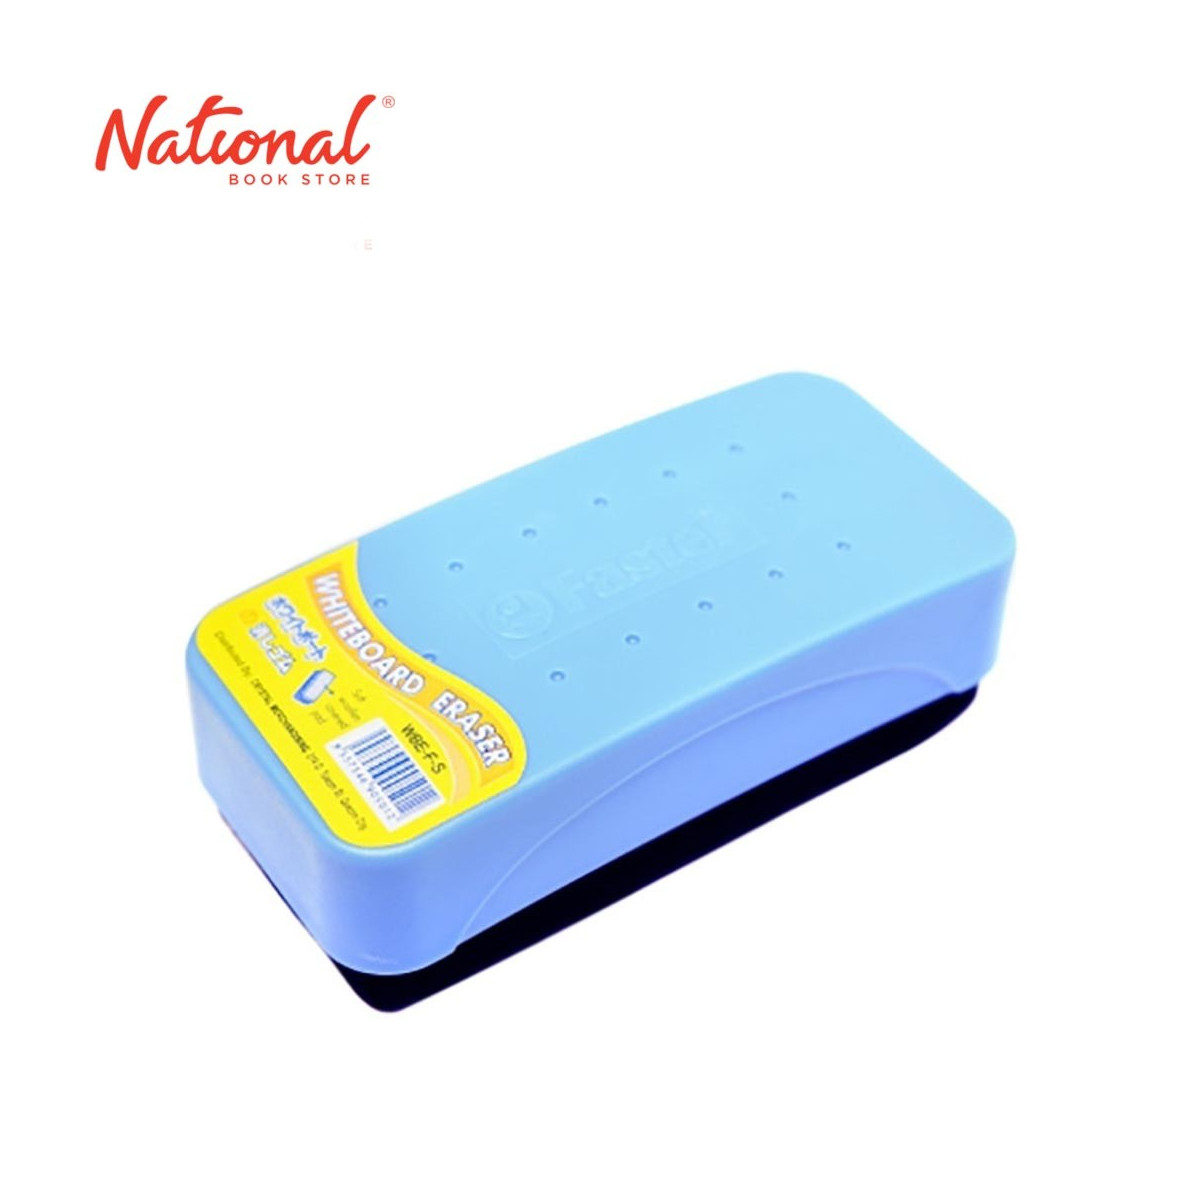 FASTER BOARD ERASER WBES SMALL, BLUE